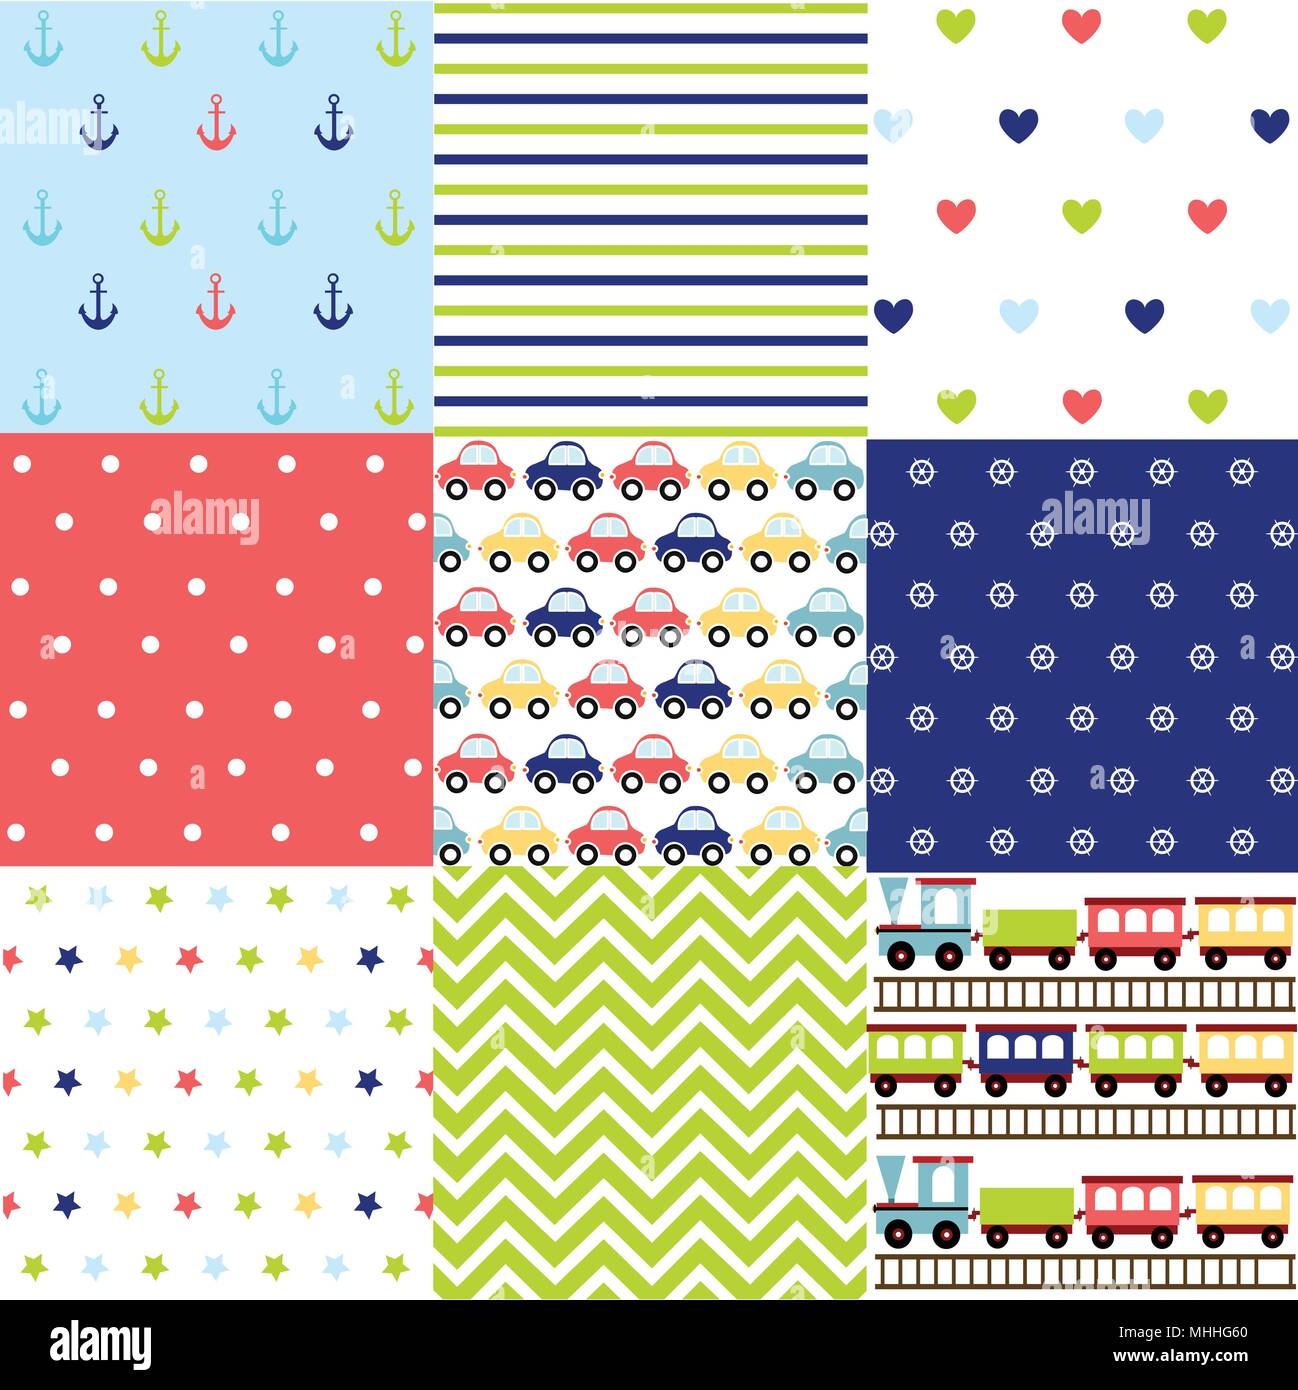 Cute set of Baby Boy seamless patterns with fabric textures Stock Vector